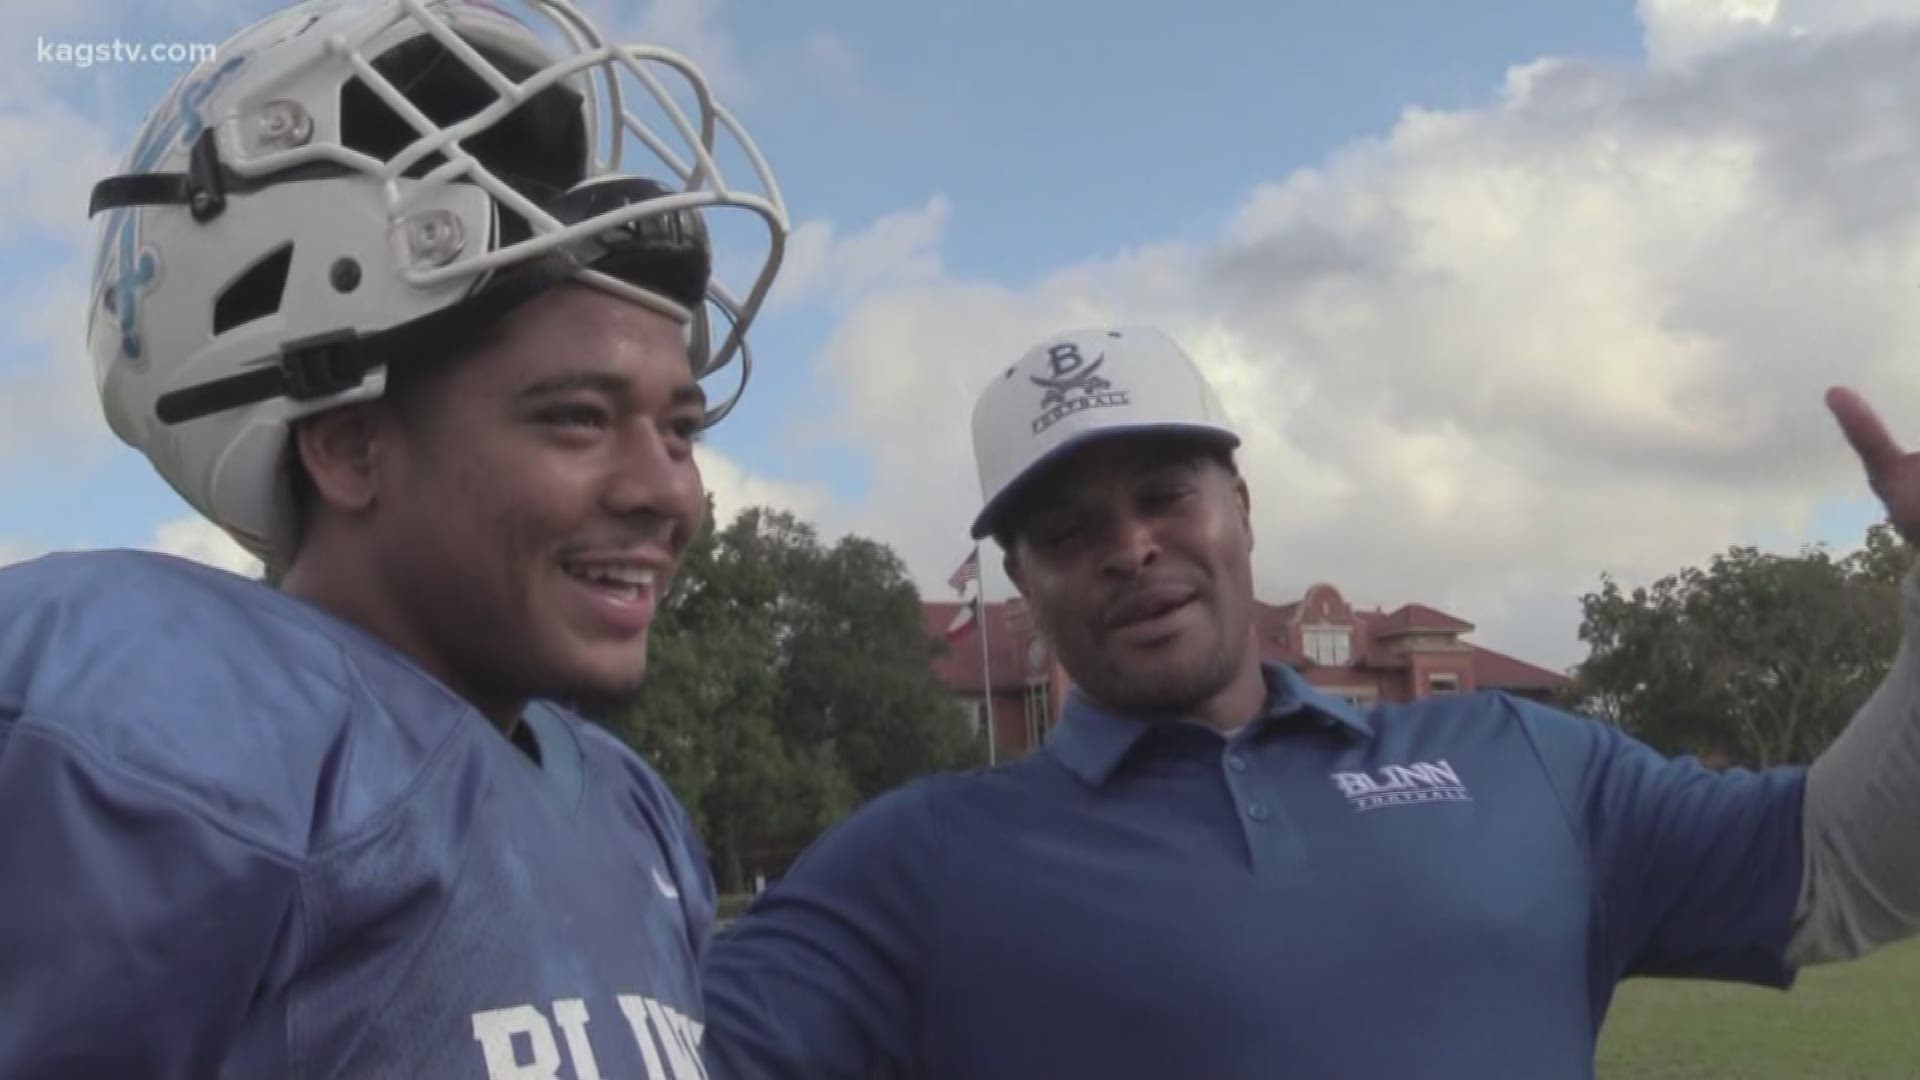 Blinn head coach Ryan Mahon added a unique piece to his coaching staff this season. Here's the story of "Home Run" hire Quentin Griffin.